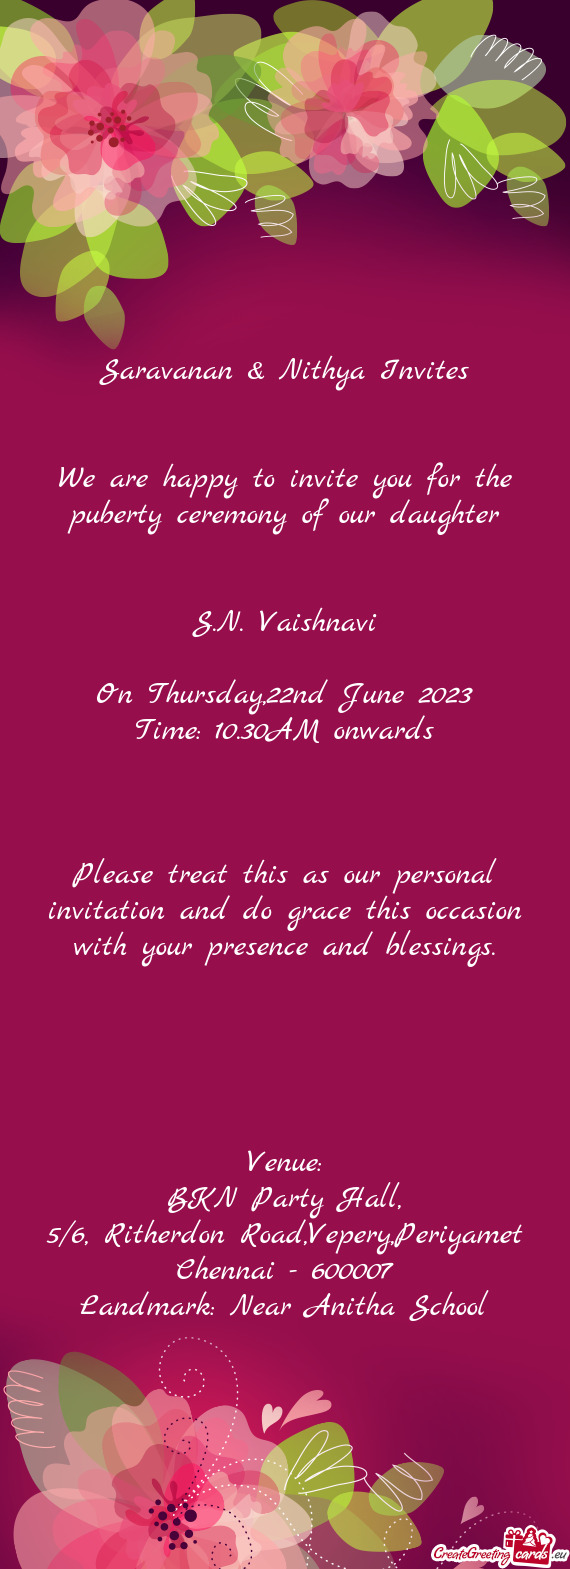 We are happy to invite you for the puberty ceremony of our daughter